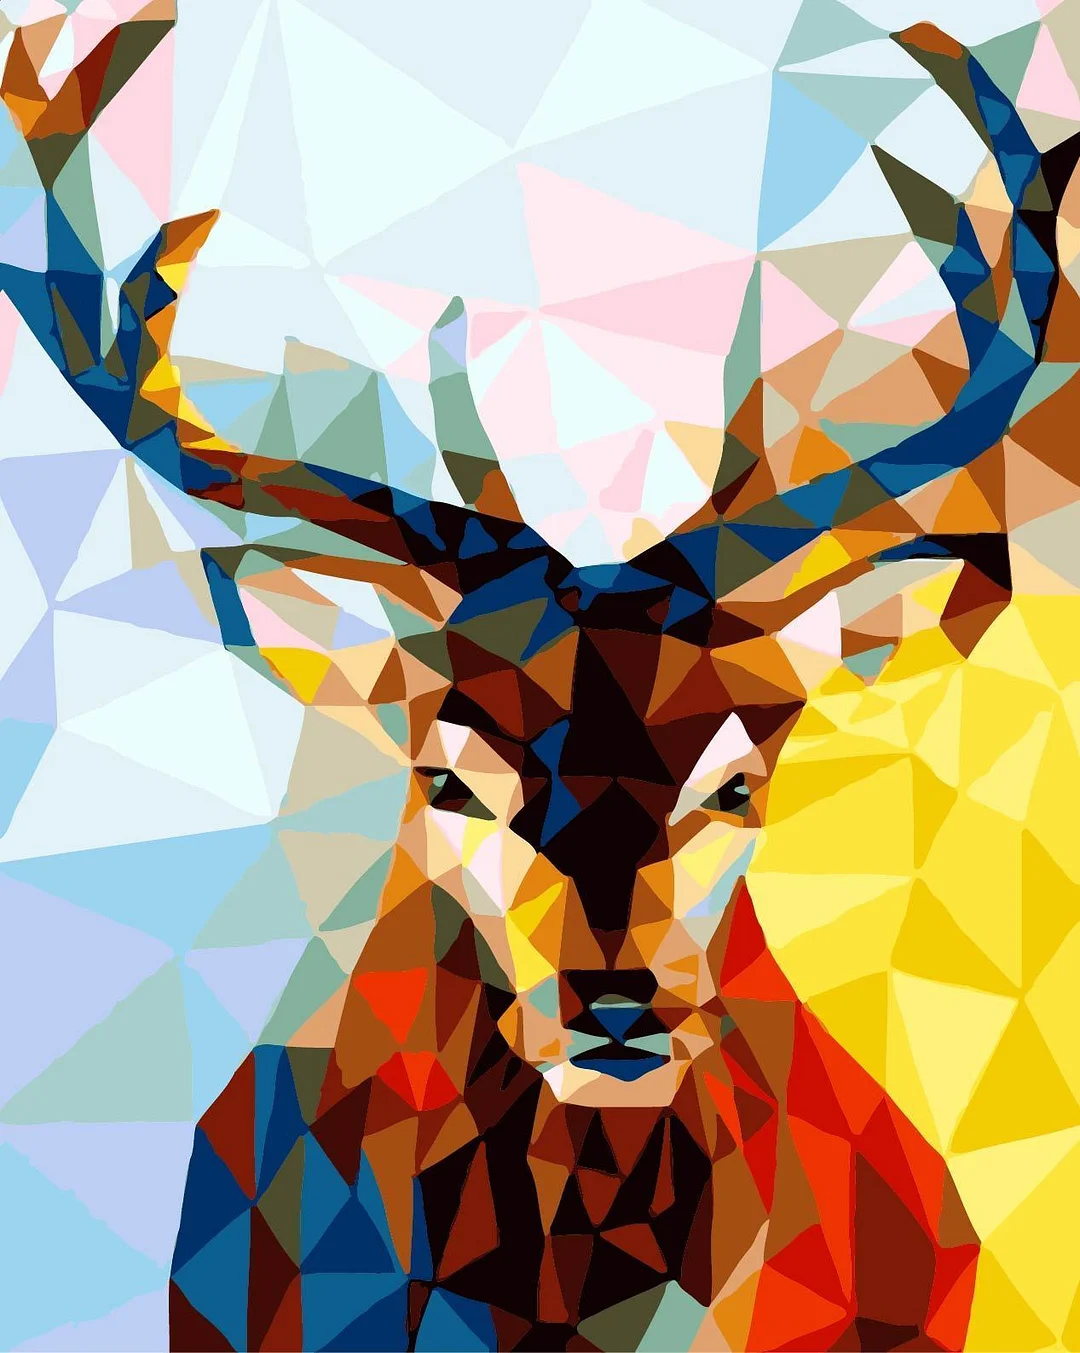 Animal Deer Paint By Numbers Kits UK For Adult HQD1280